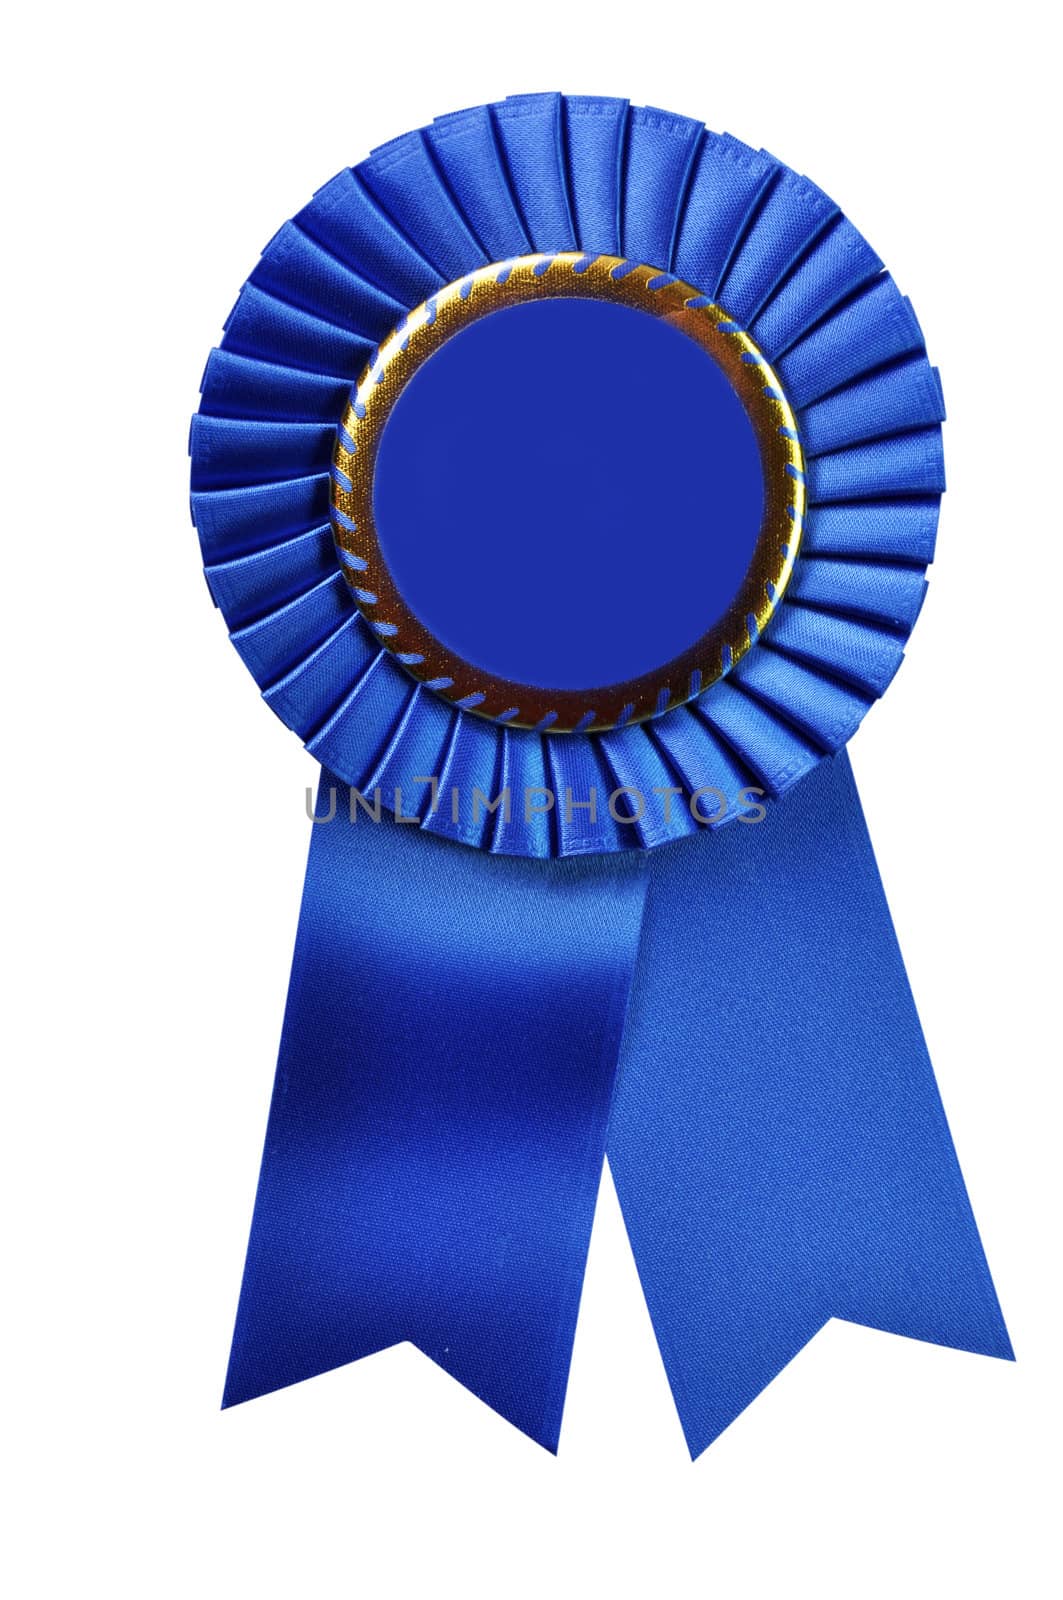 Blue Ribbon Award (with clipping path) by dehooks